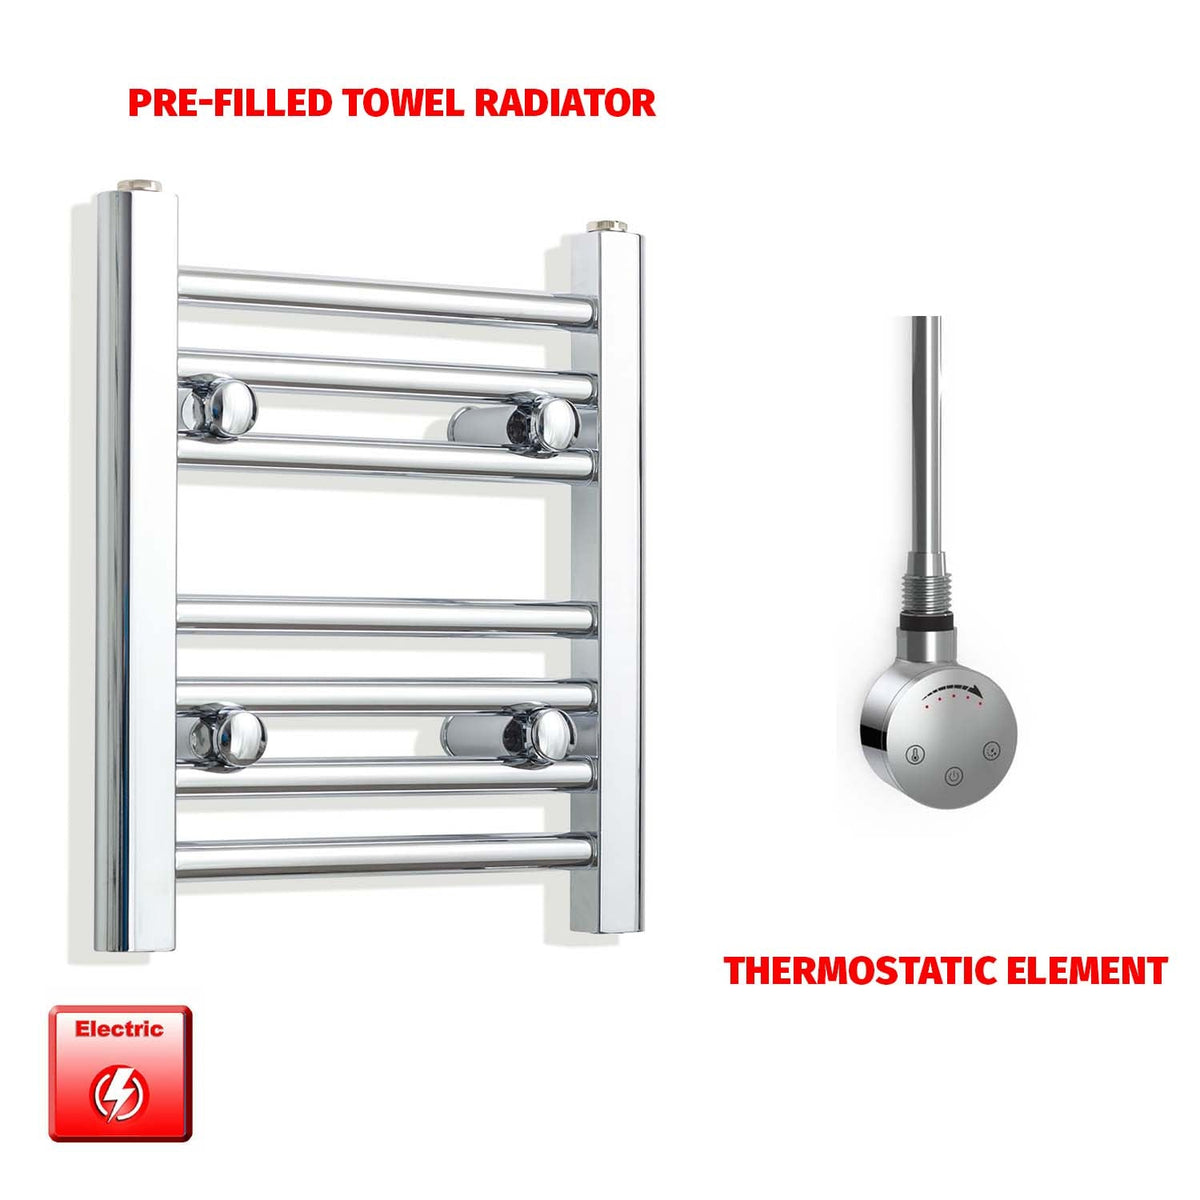 400mm High 300mm Wide Pre-Filled Electric Heated Towel Rail Radiator Straight Chrome Smart Element No Timer